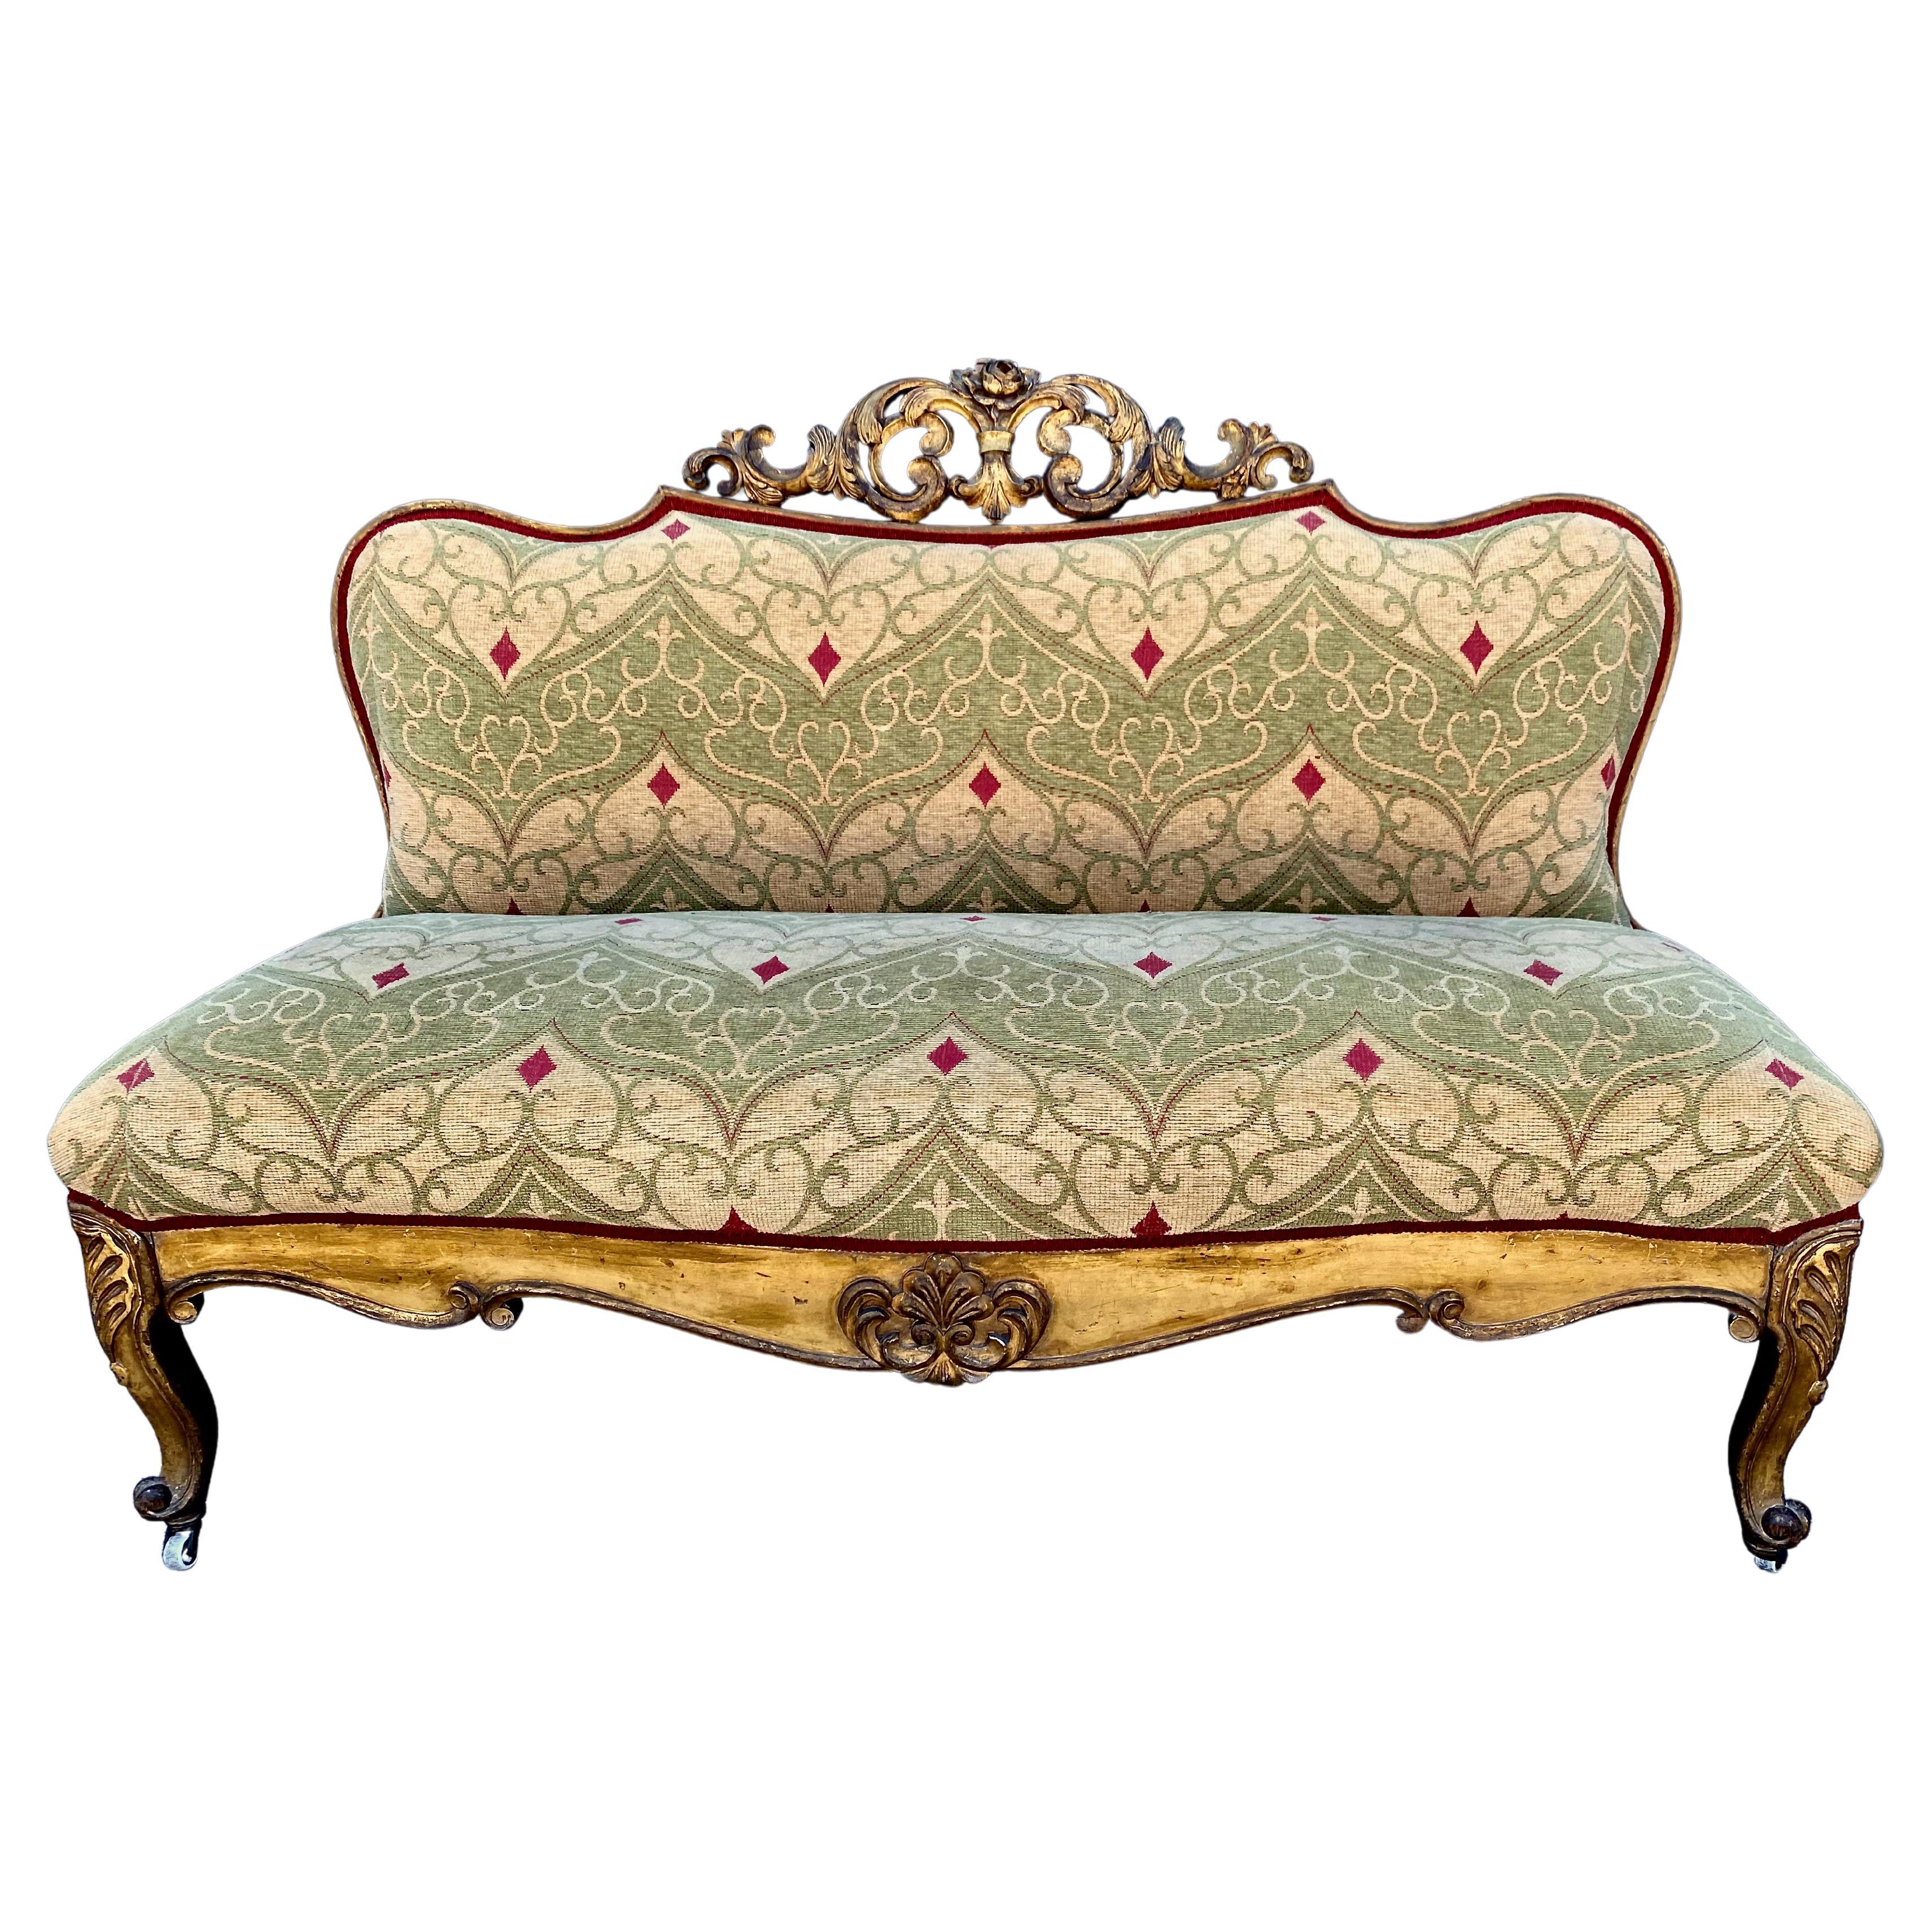 19th Century Rococo-Style Gilt Settee or Bench